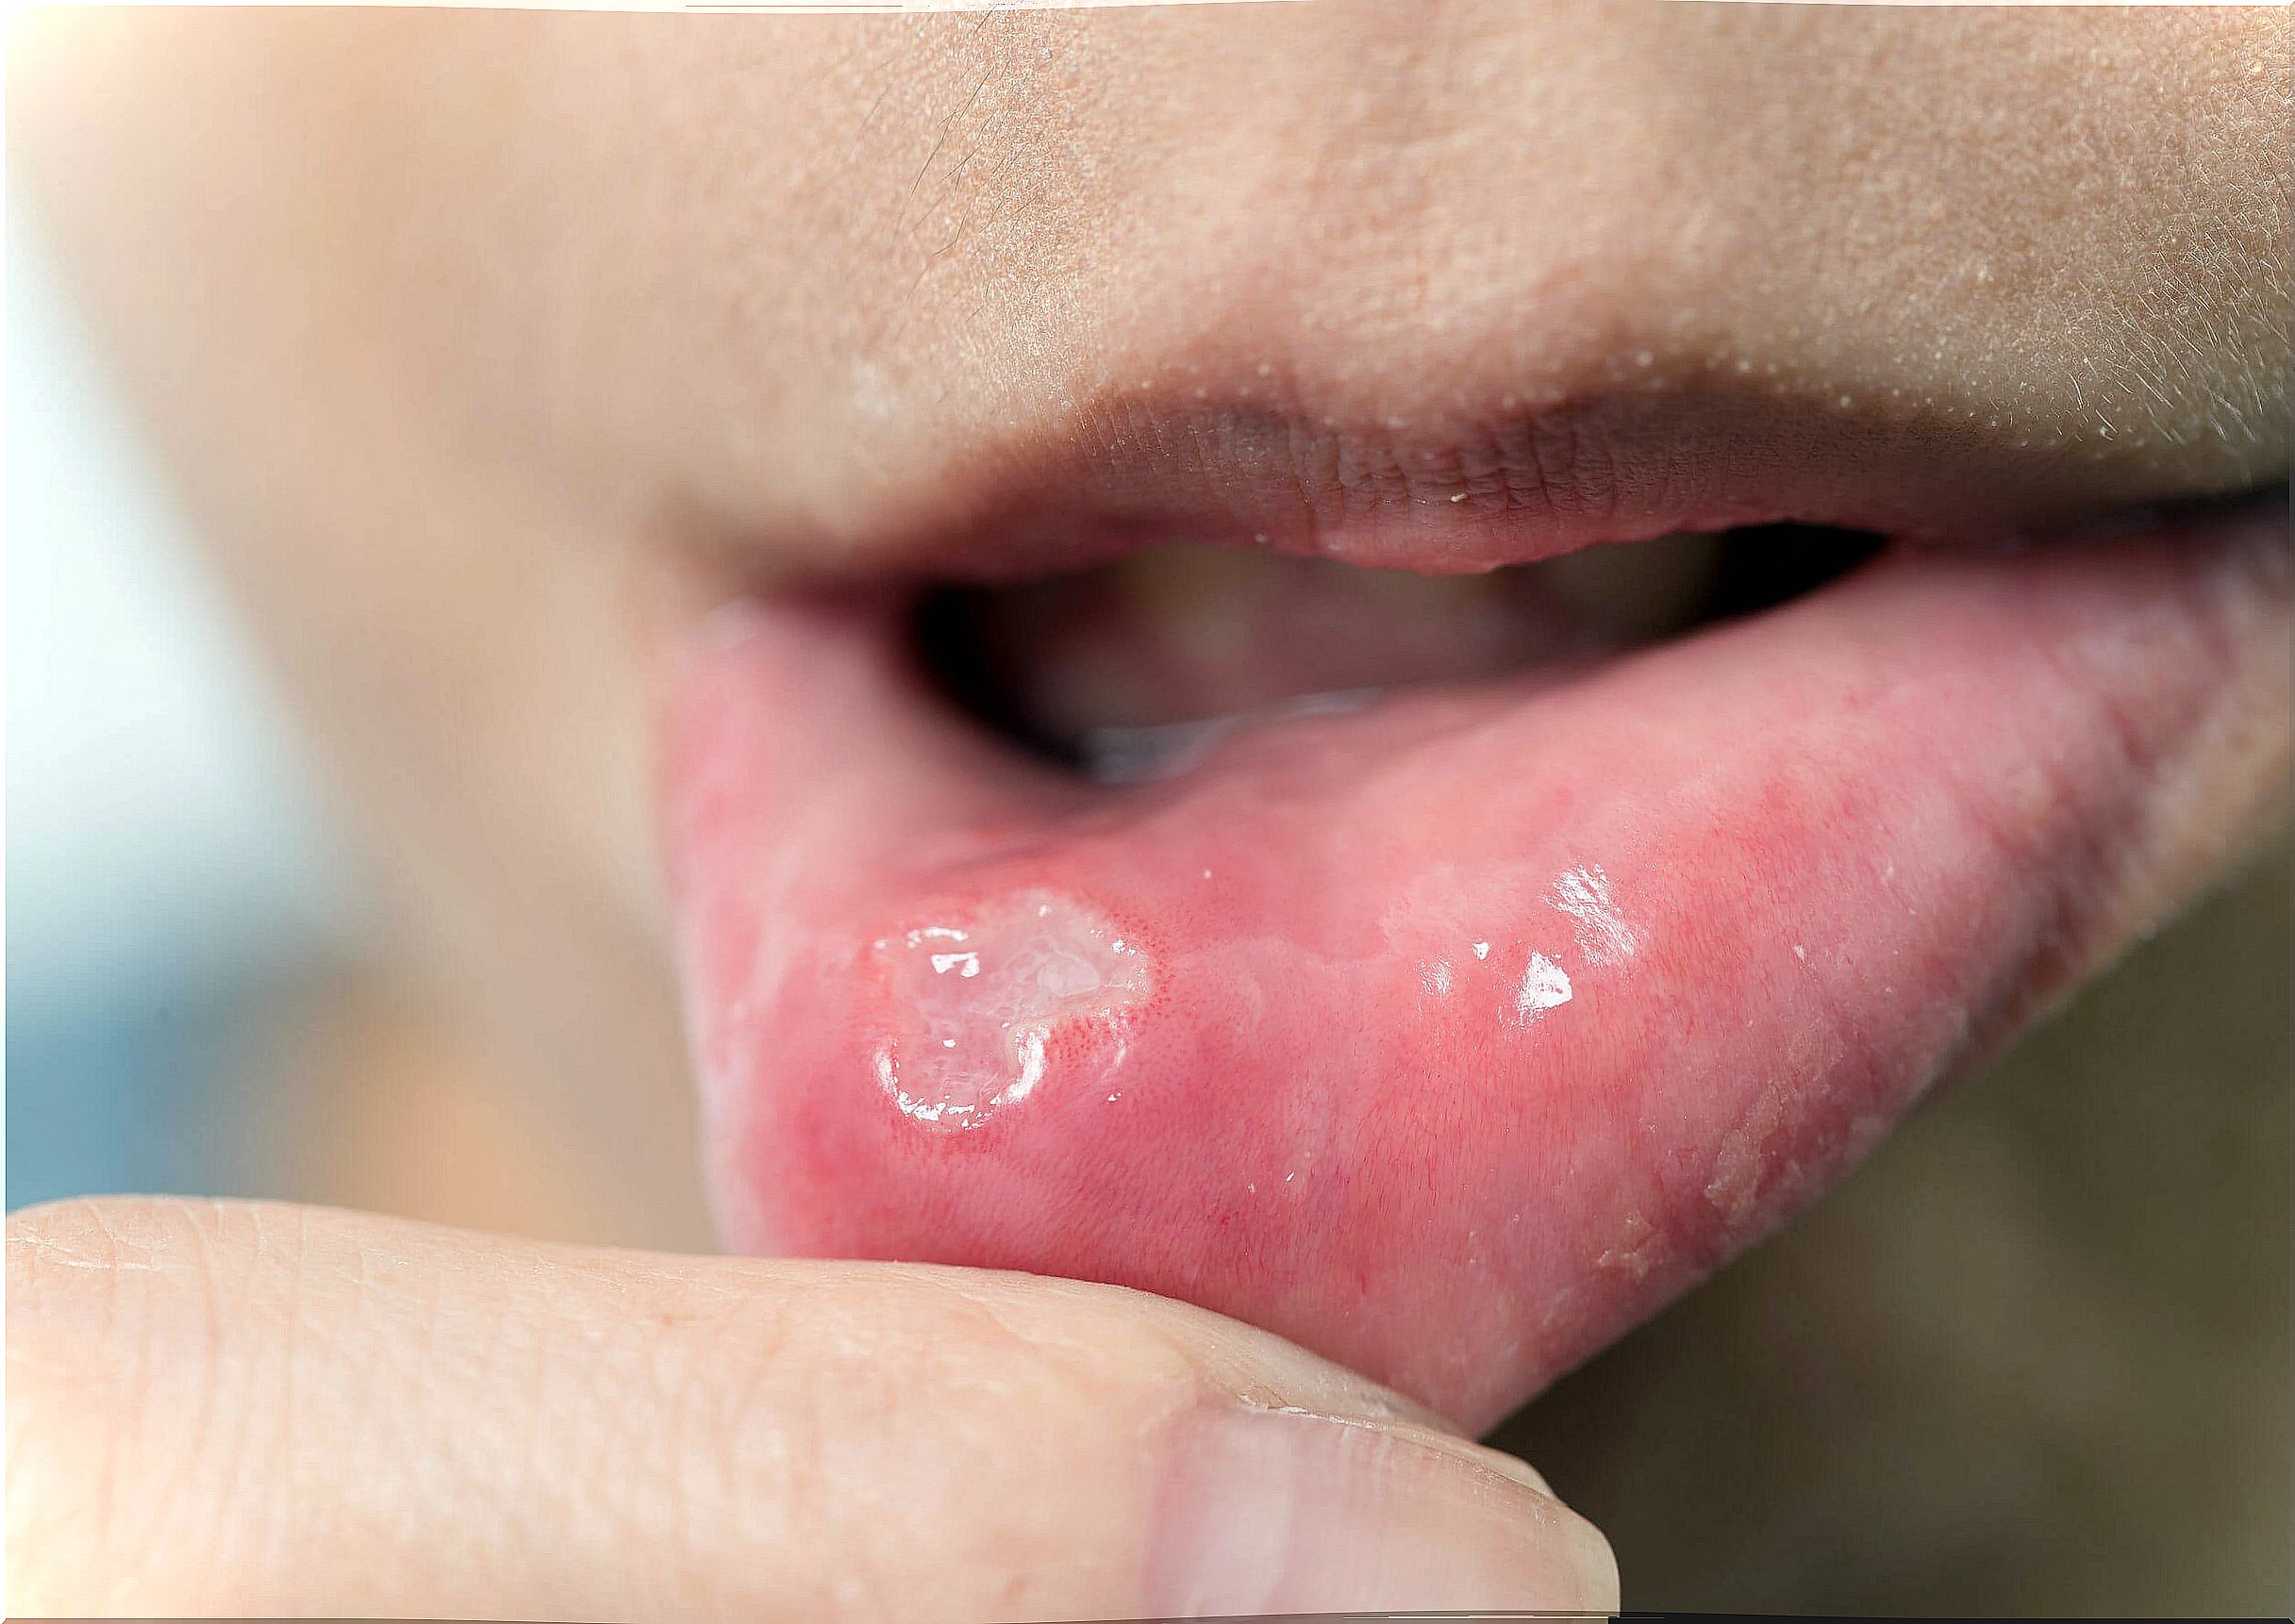 Why do mouth sores appear?